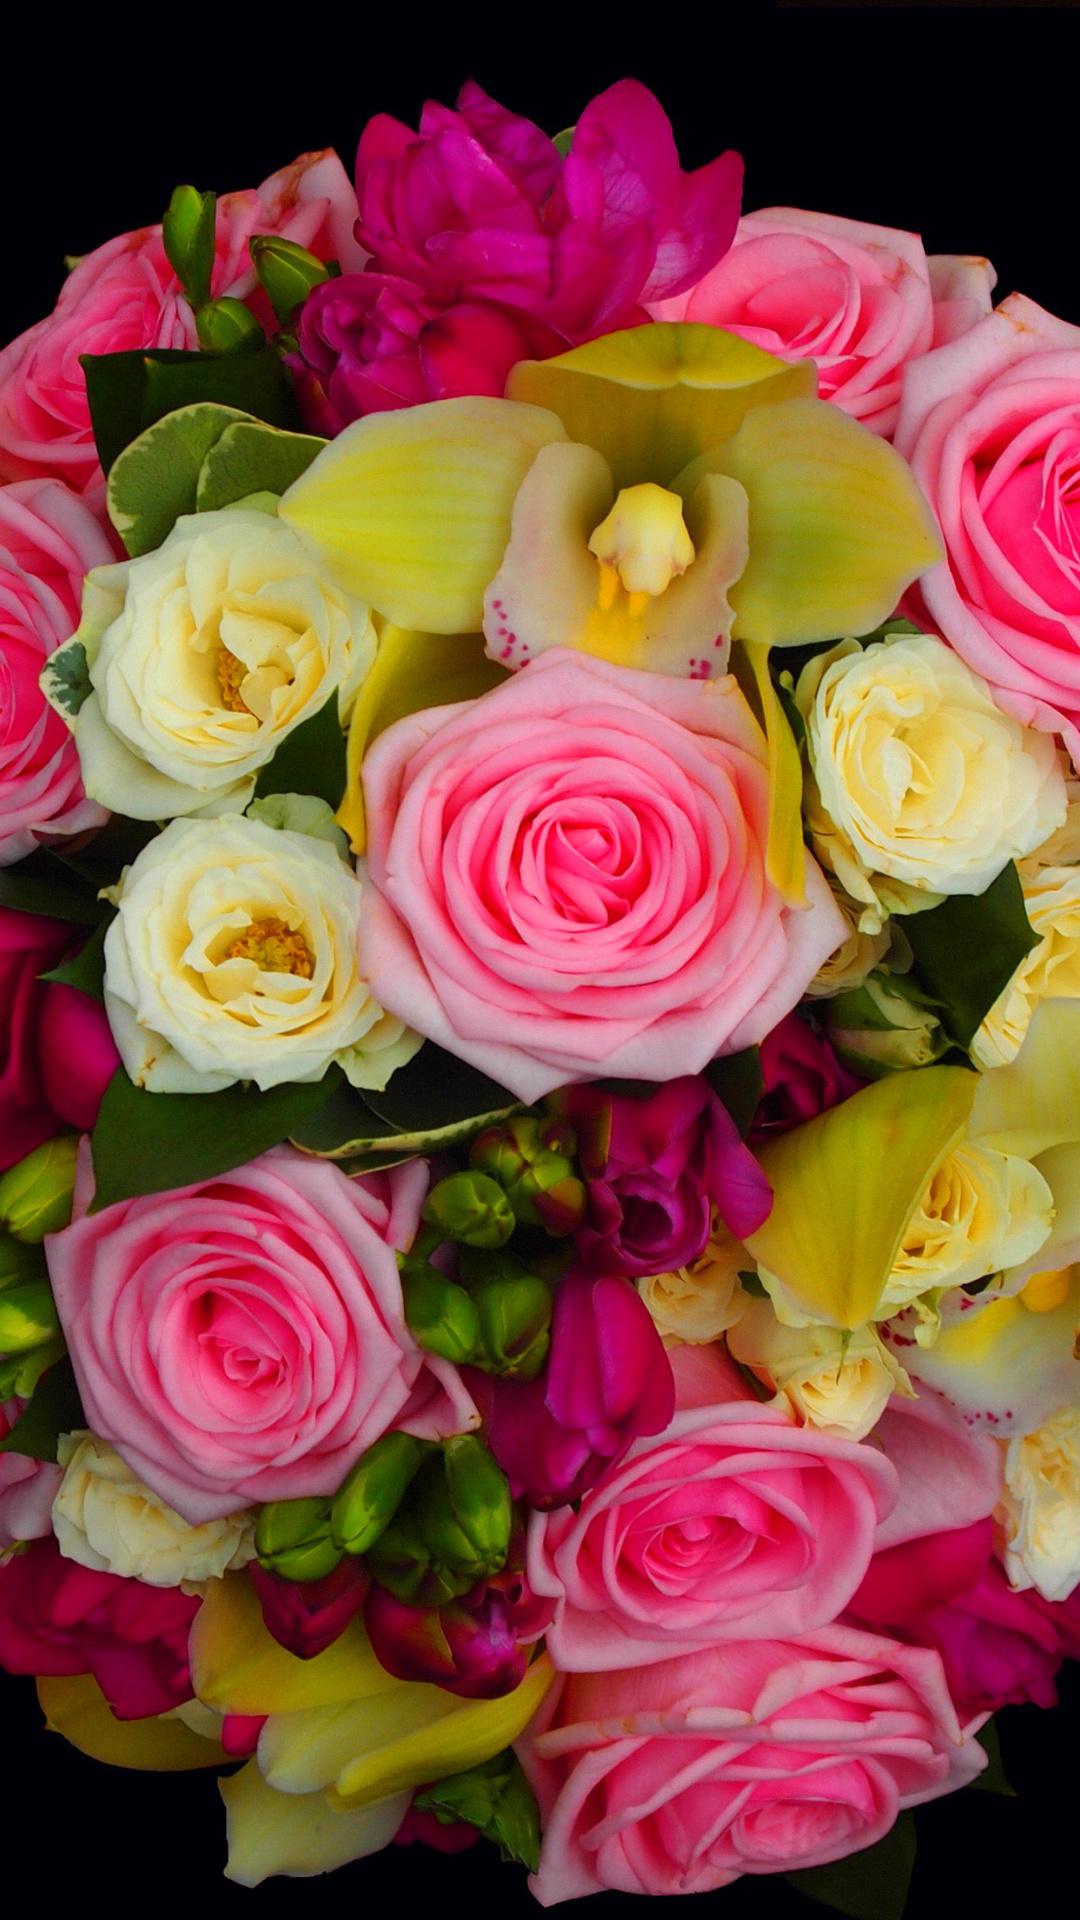 Das Bouquet of roses and yellow orchid, floristry Wallpaper 1080x1920